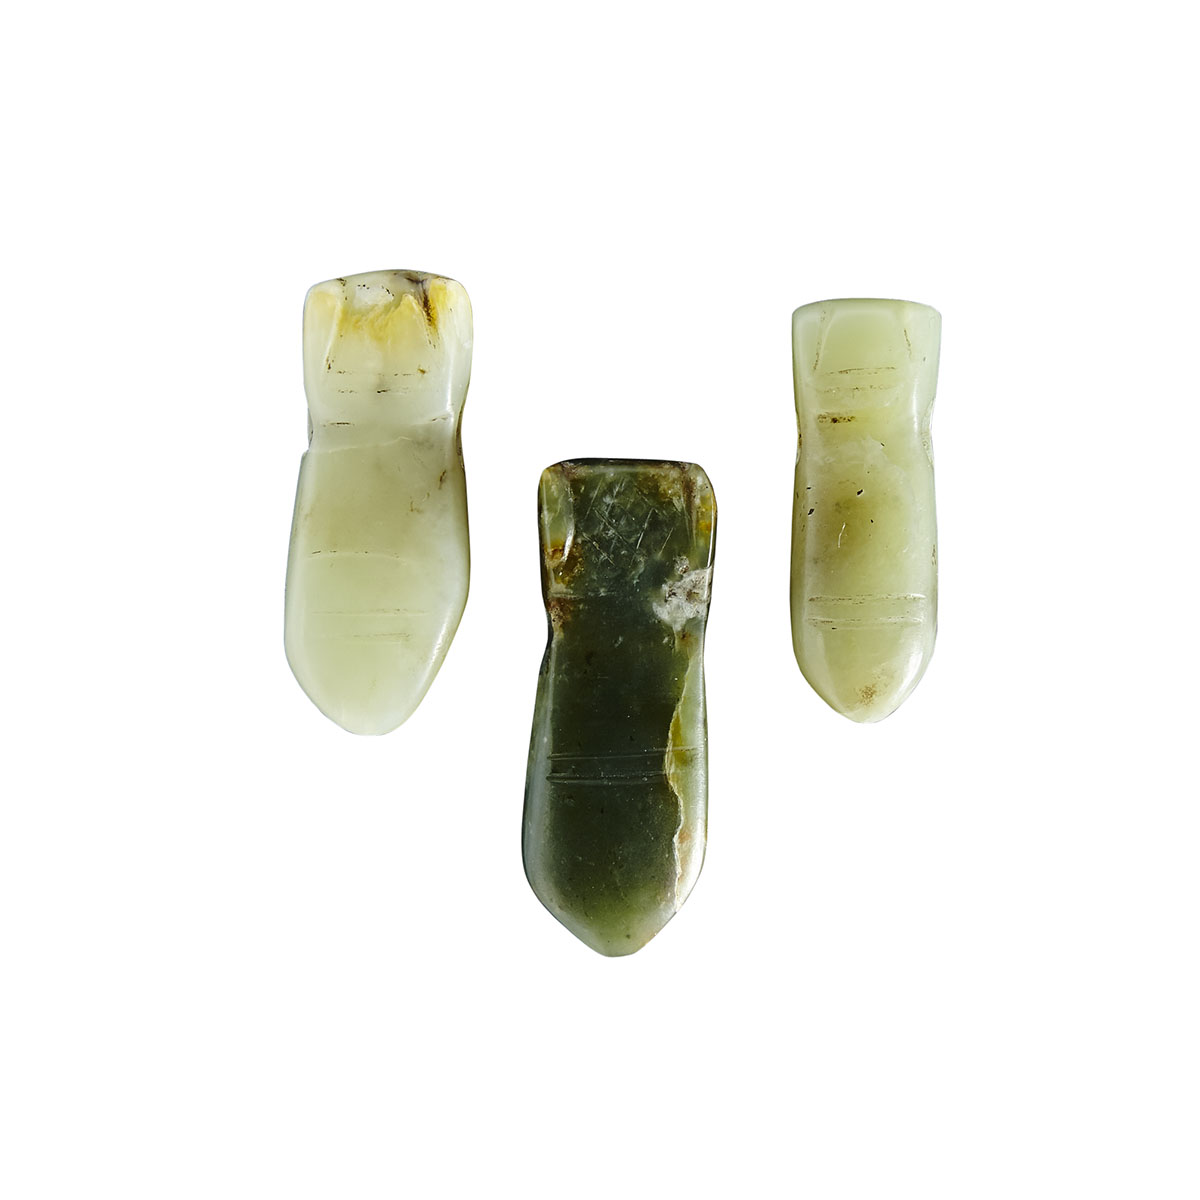 Set of Three Jade Cicadas, Hongshan Culture, Neolithic Period or Later